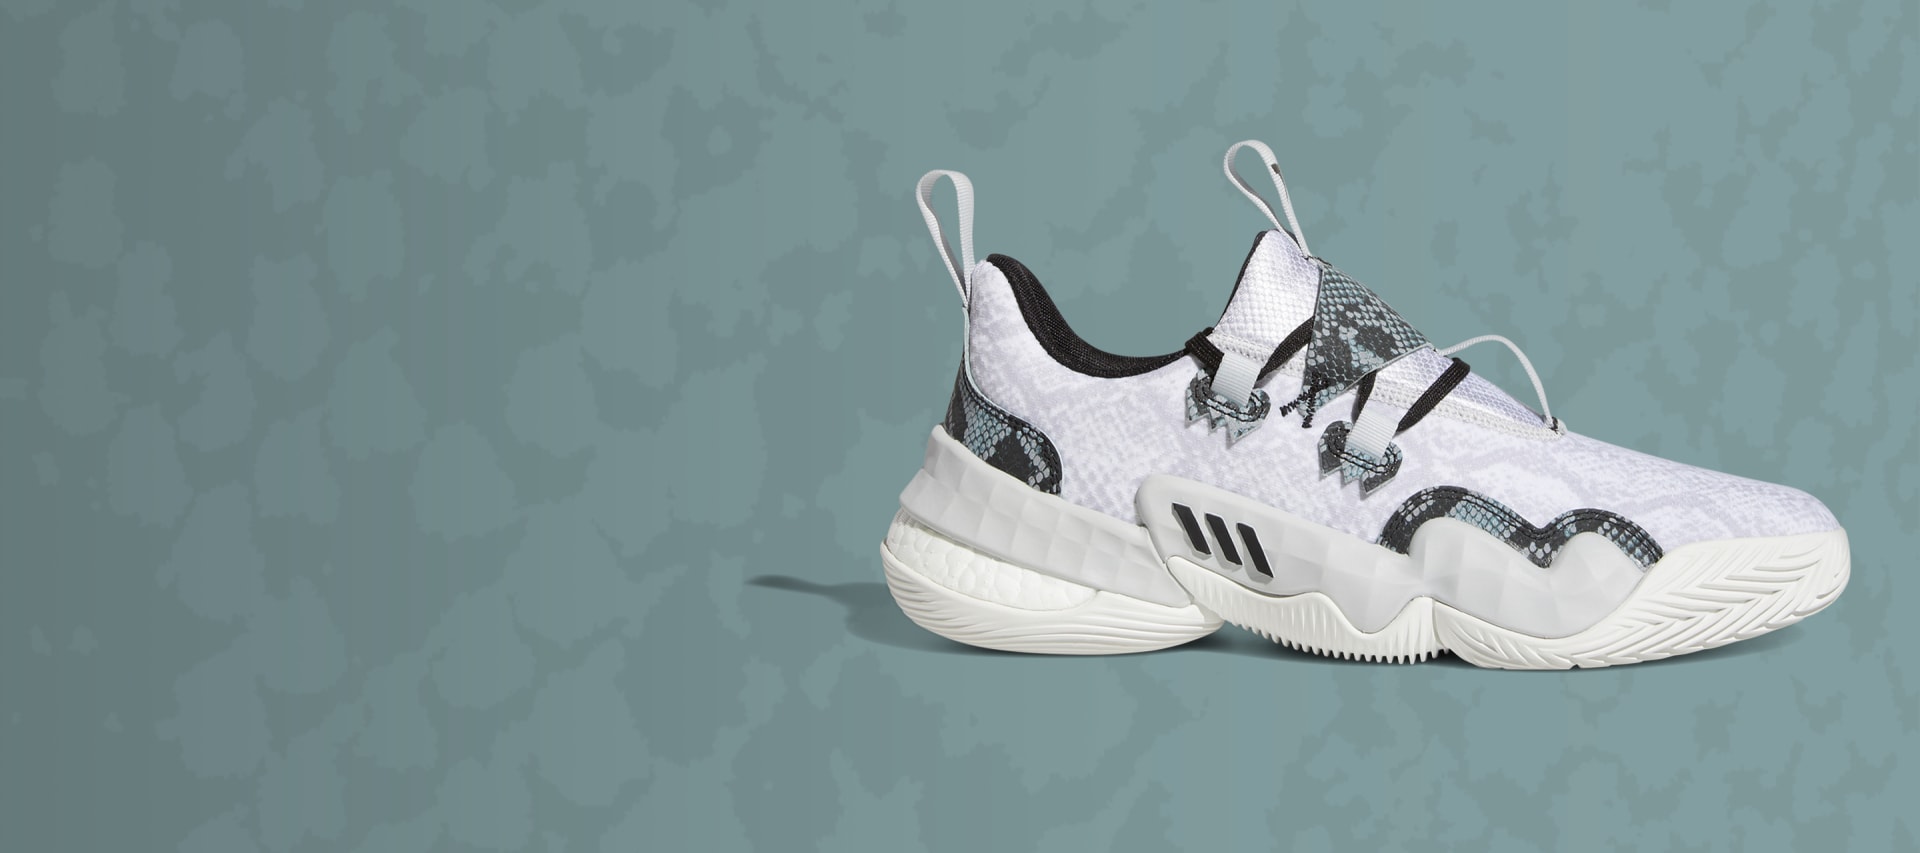 Basketball Shoes Clothing And Accessories Adidas Us